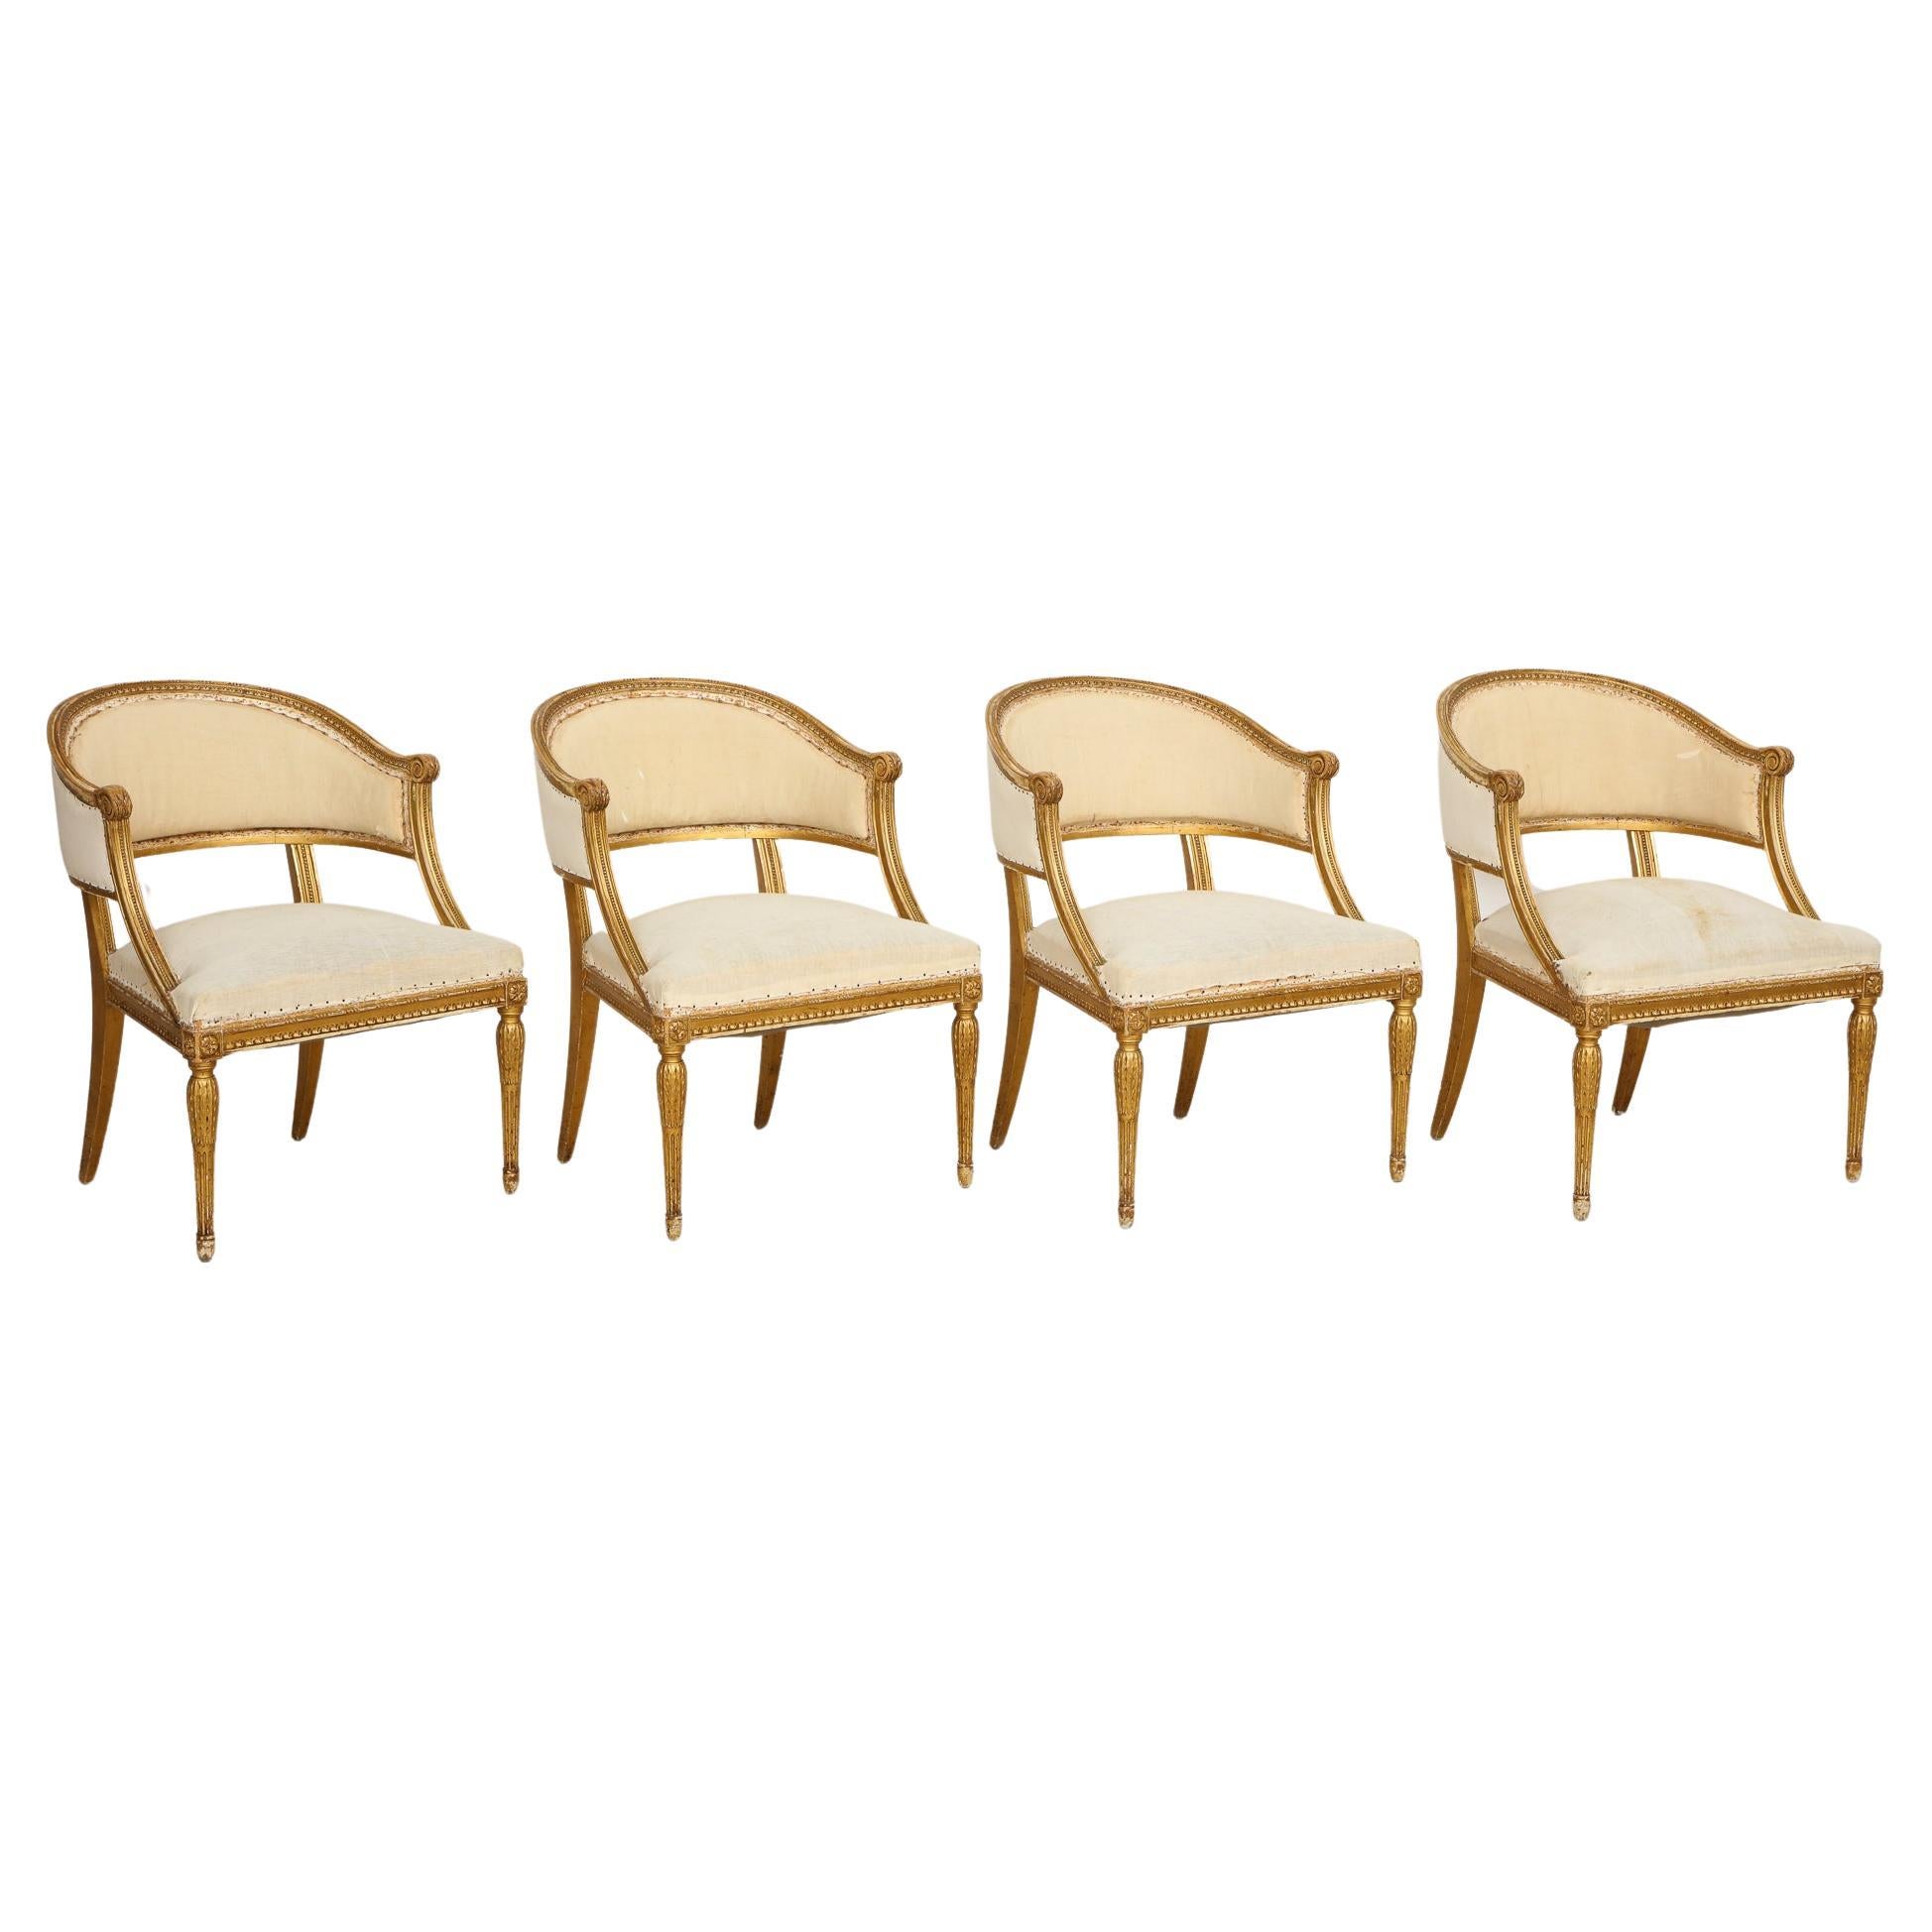 18th Century Giltwood Gustavian Bucket Chairs, Set of 4, Sweden, Circa 1790-1800 For Sale